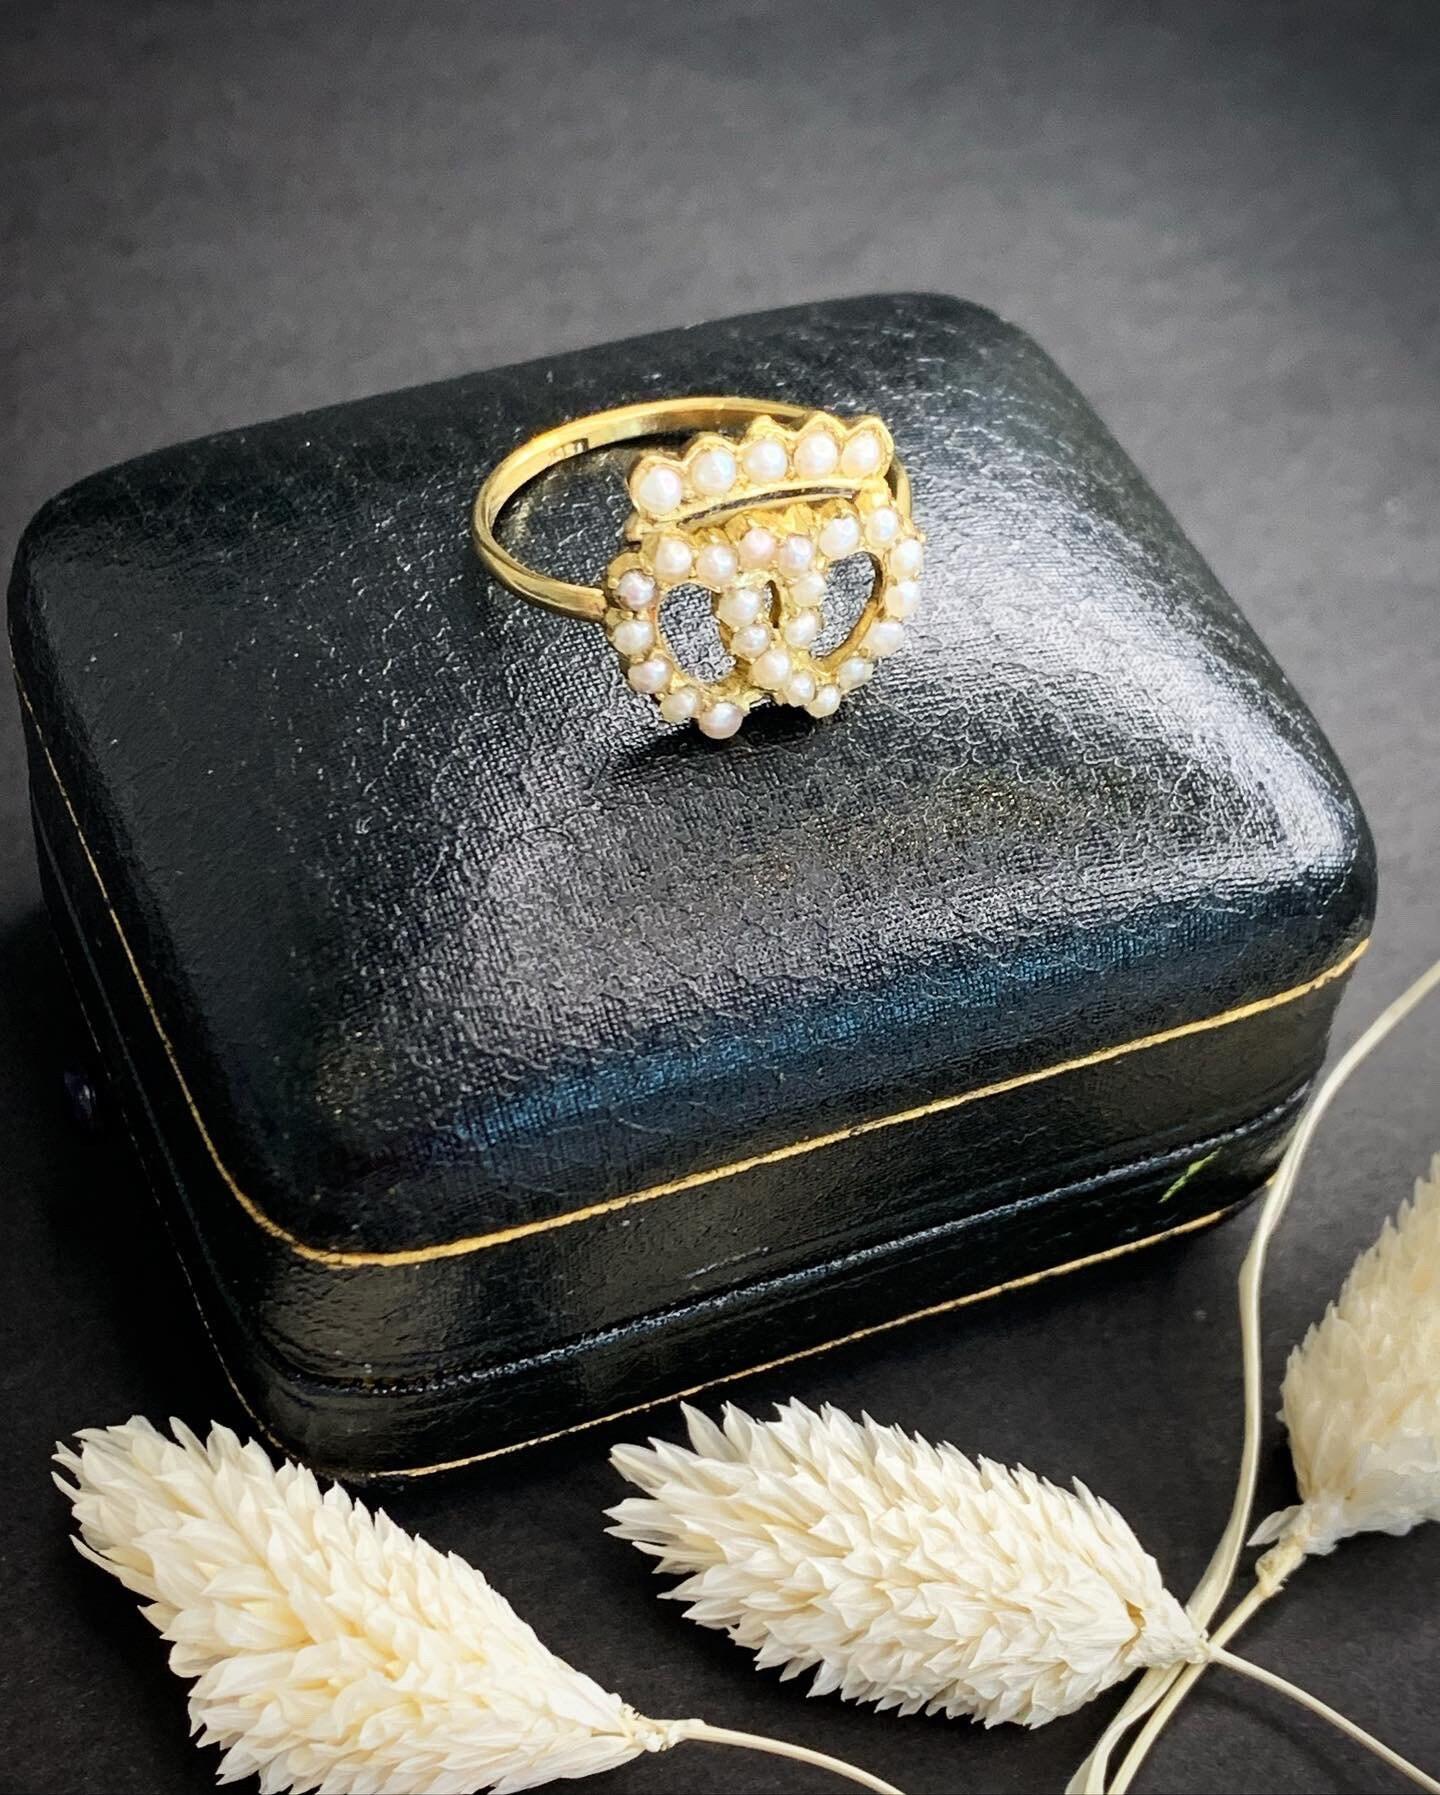 Antique Sweetheart Ring

Double Sweetheart Conversion From Pin to Ring

15ct Gold Set with Gorgeous Seed Pearls

Circa 1900

UK Size S 1/2 

US Size 9 1/2

 
Can be resized using our resizing service,
please contact us for more information

All of